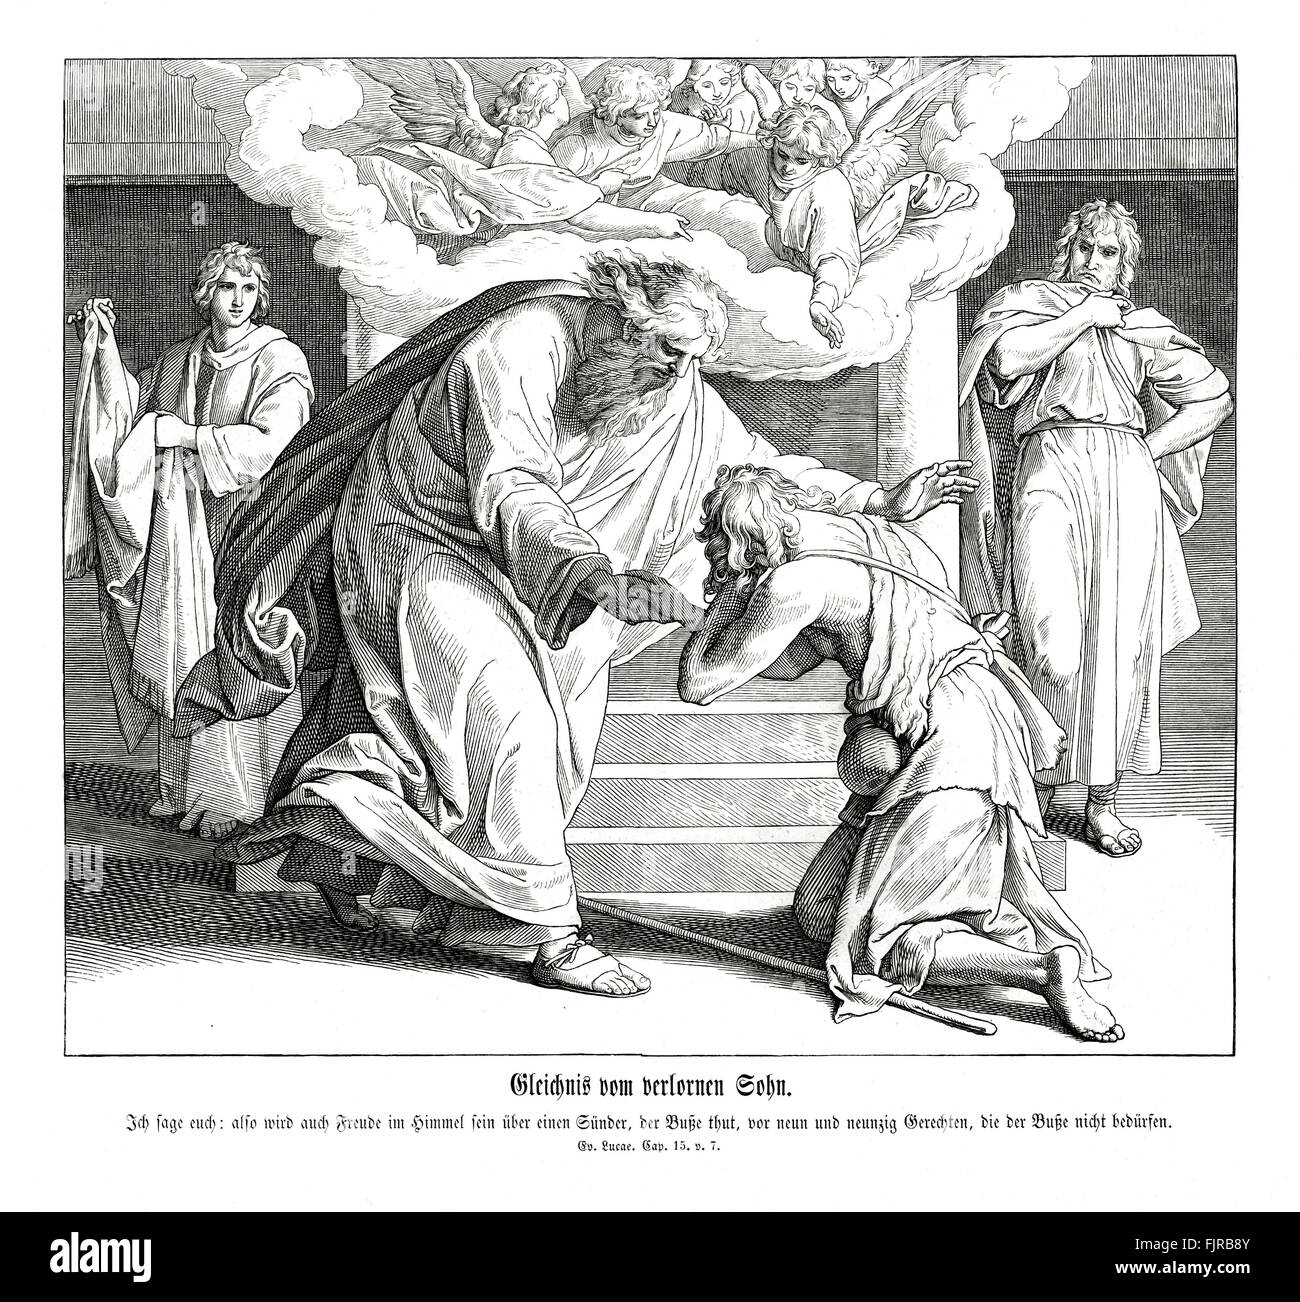 Parable of the prodigal son, Gospel of Luke chapter XV verse 7 'I say unto you, that likewise joy shall be in heaven over one sinner that repenteth, more than over ninety and nine just persons, which need no repentance.' 1852-60 illustration by Julius Schnorr von Carolsfeld Stock Photo